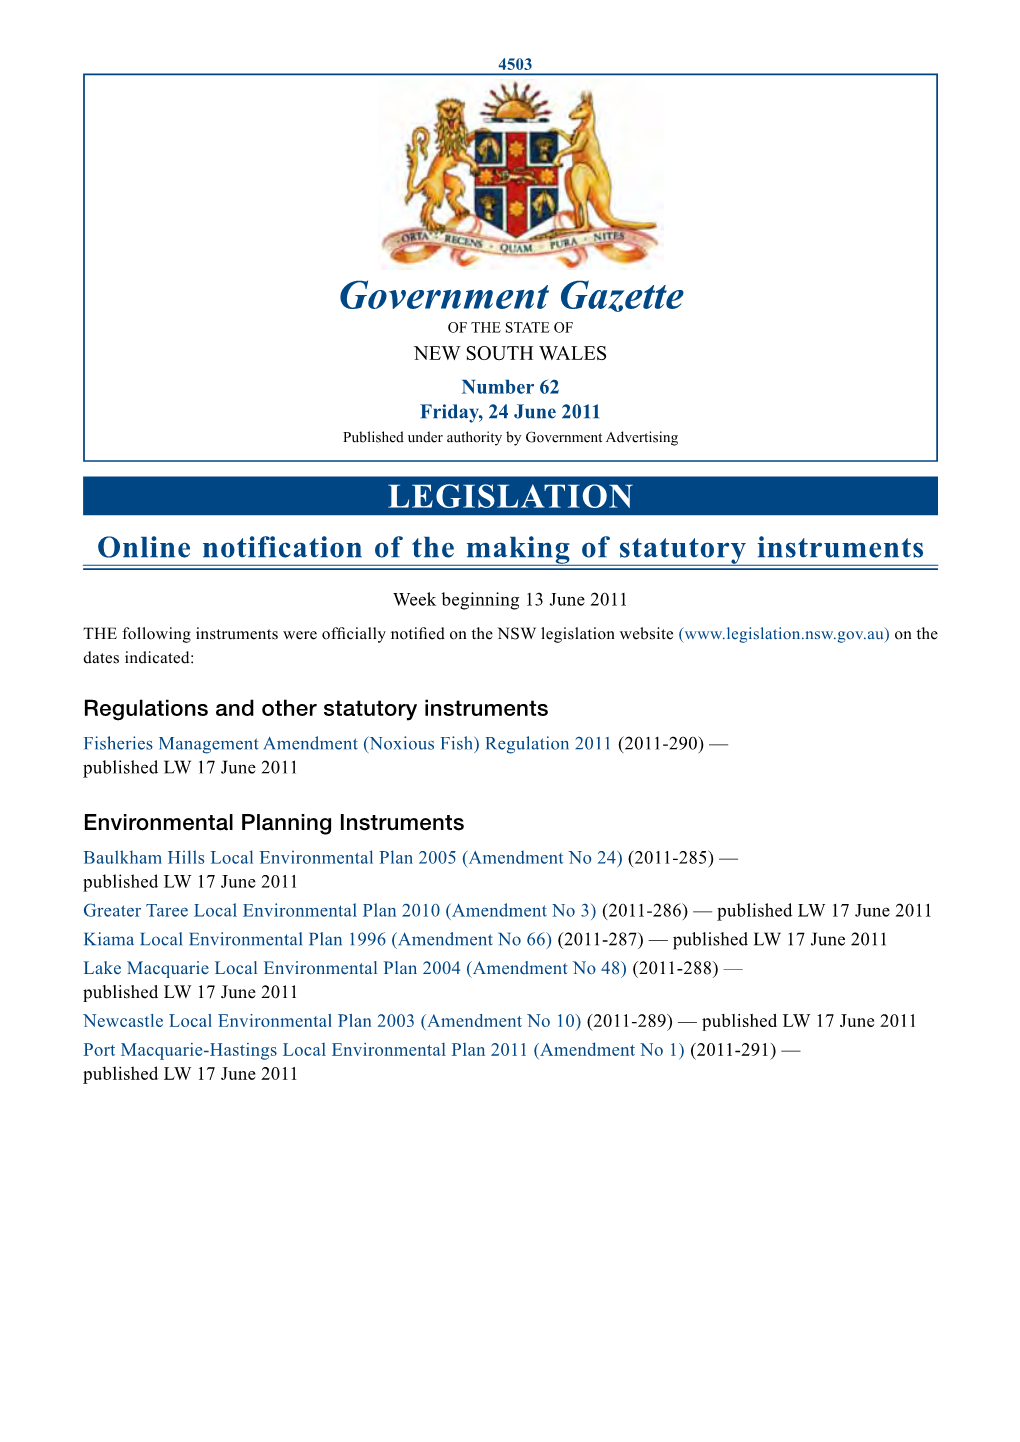 Government Gazette of the STATE of NEW SOUTH WALES Number 62 Friday, 24 June 2011 Published Under Authority by Government Advertising